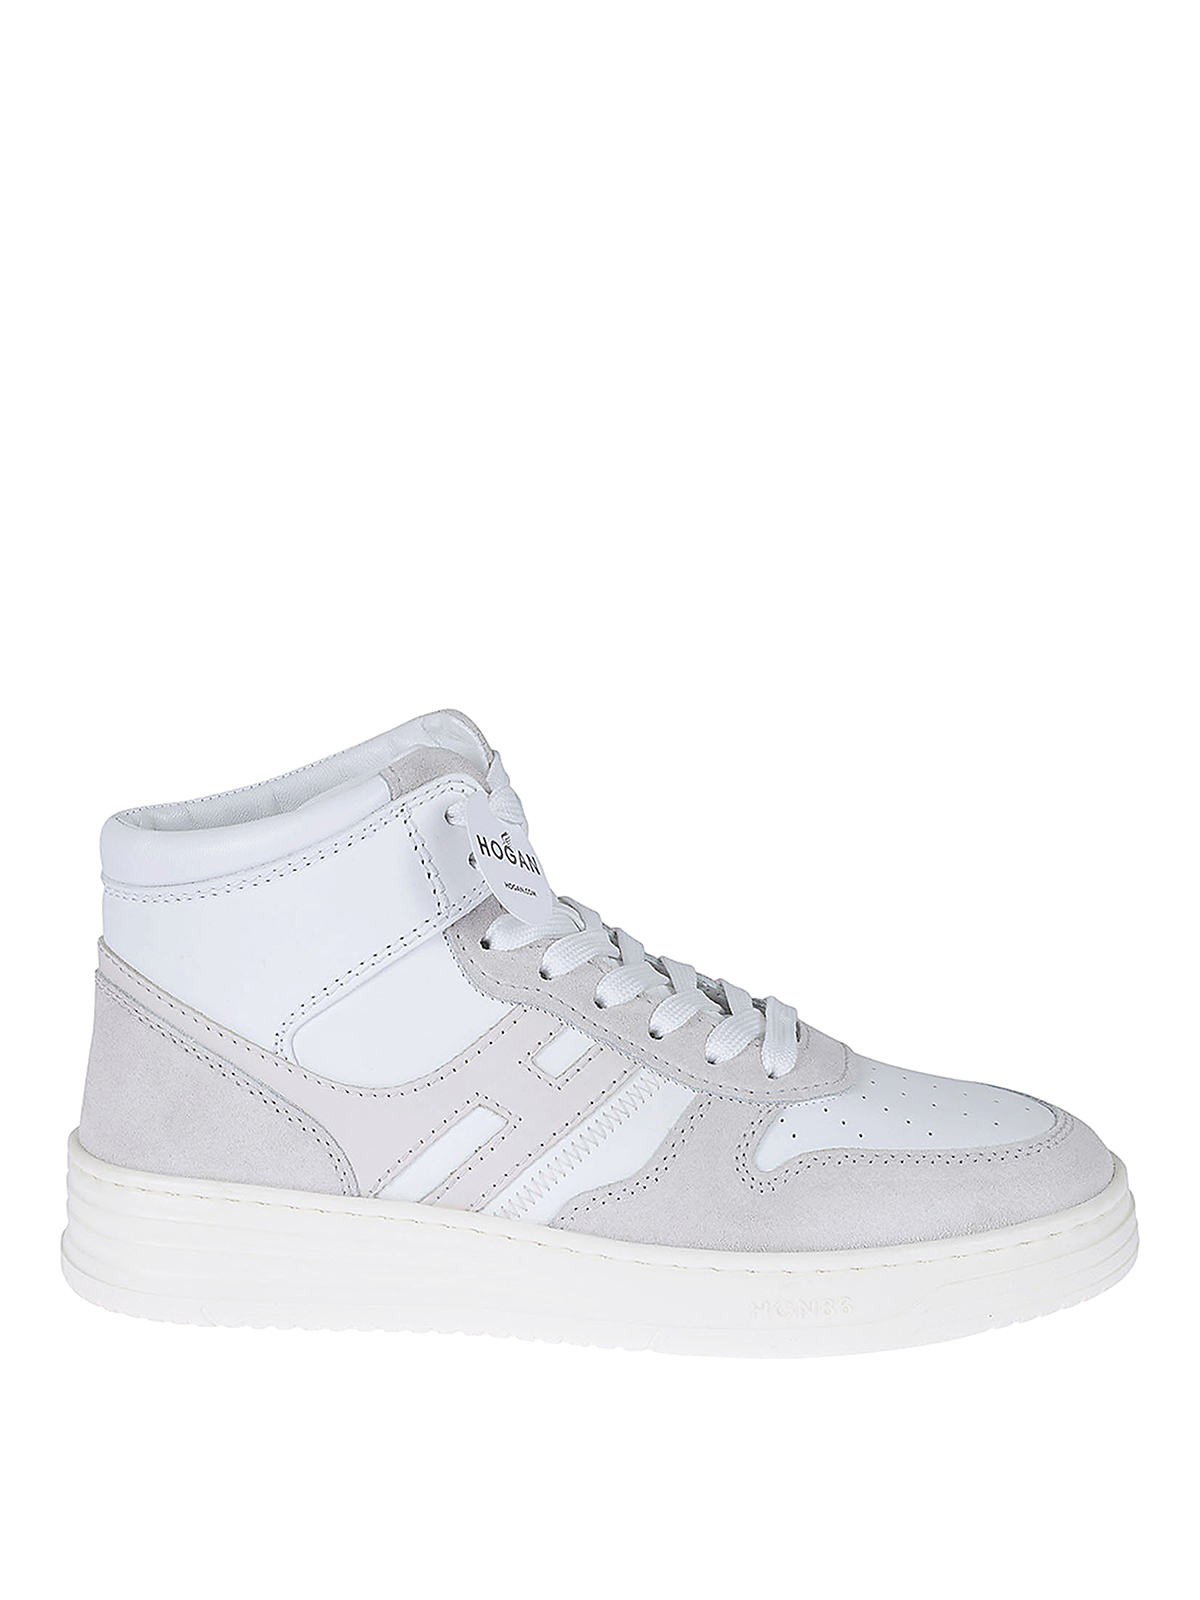 Hogan High Top H630 Sneakers In White